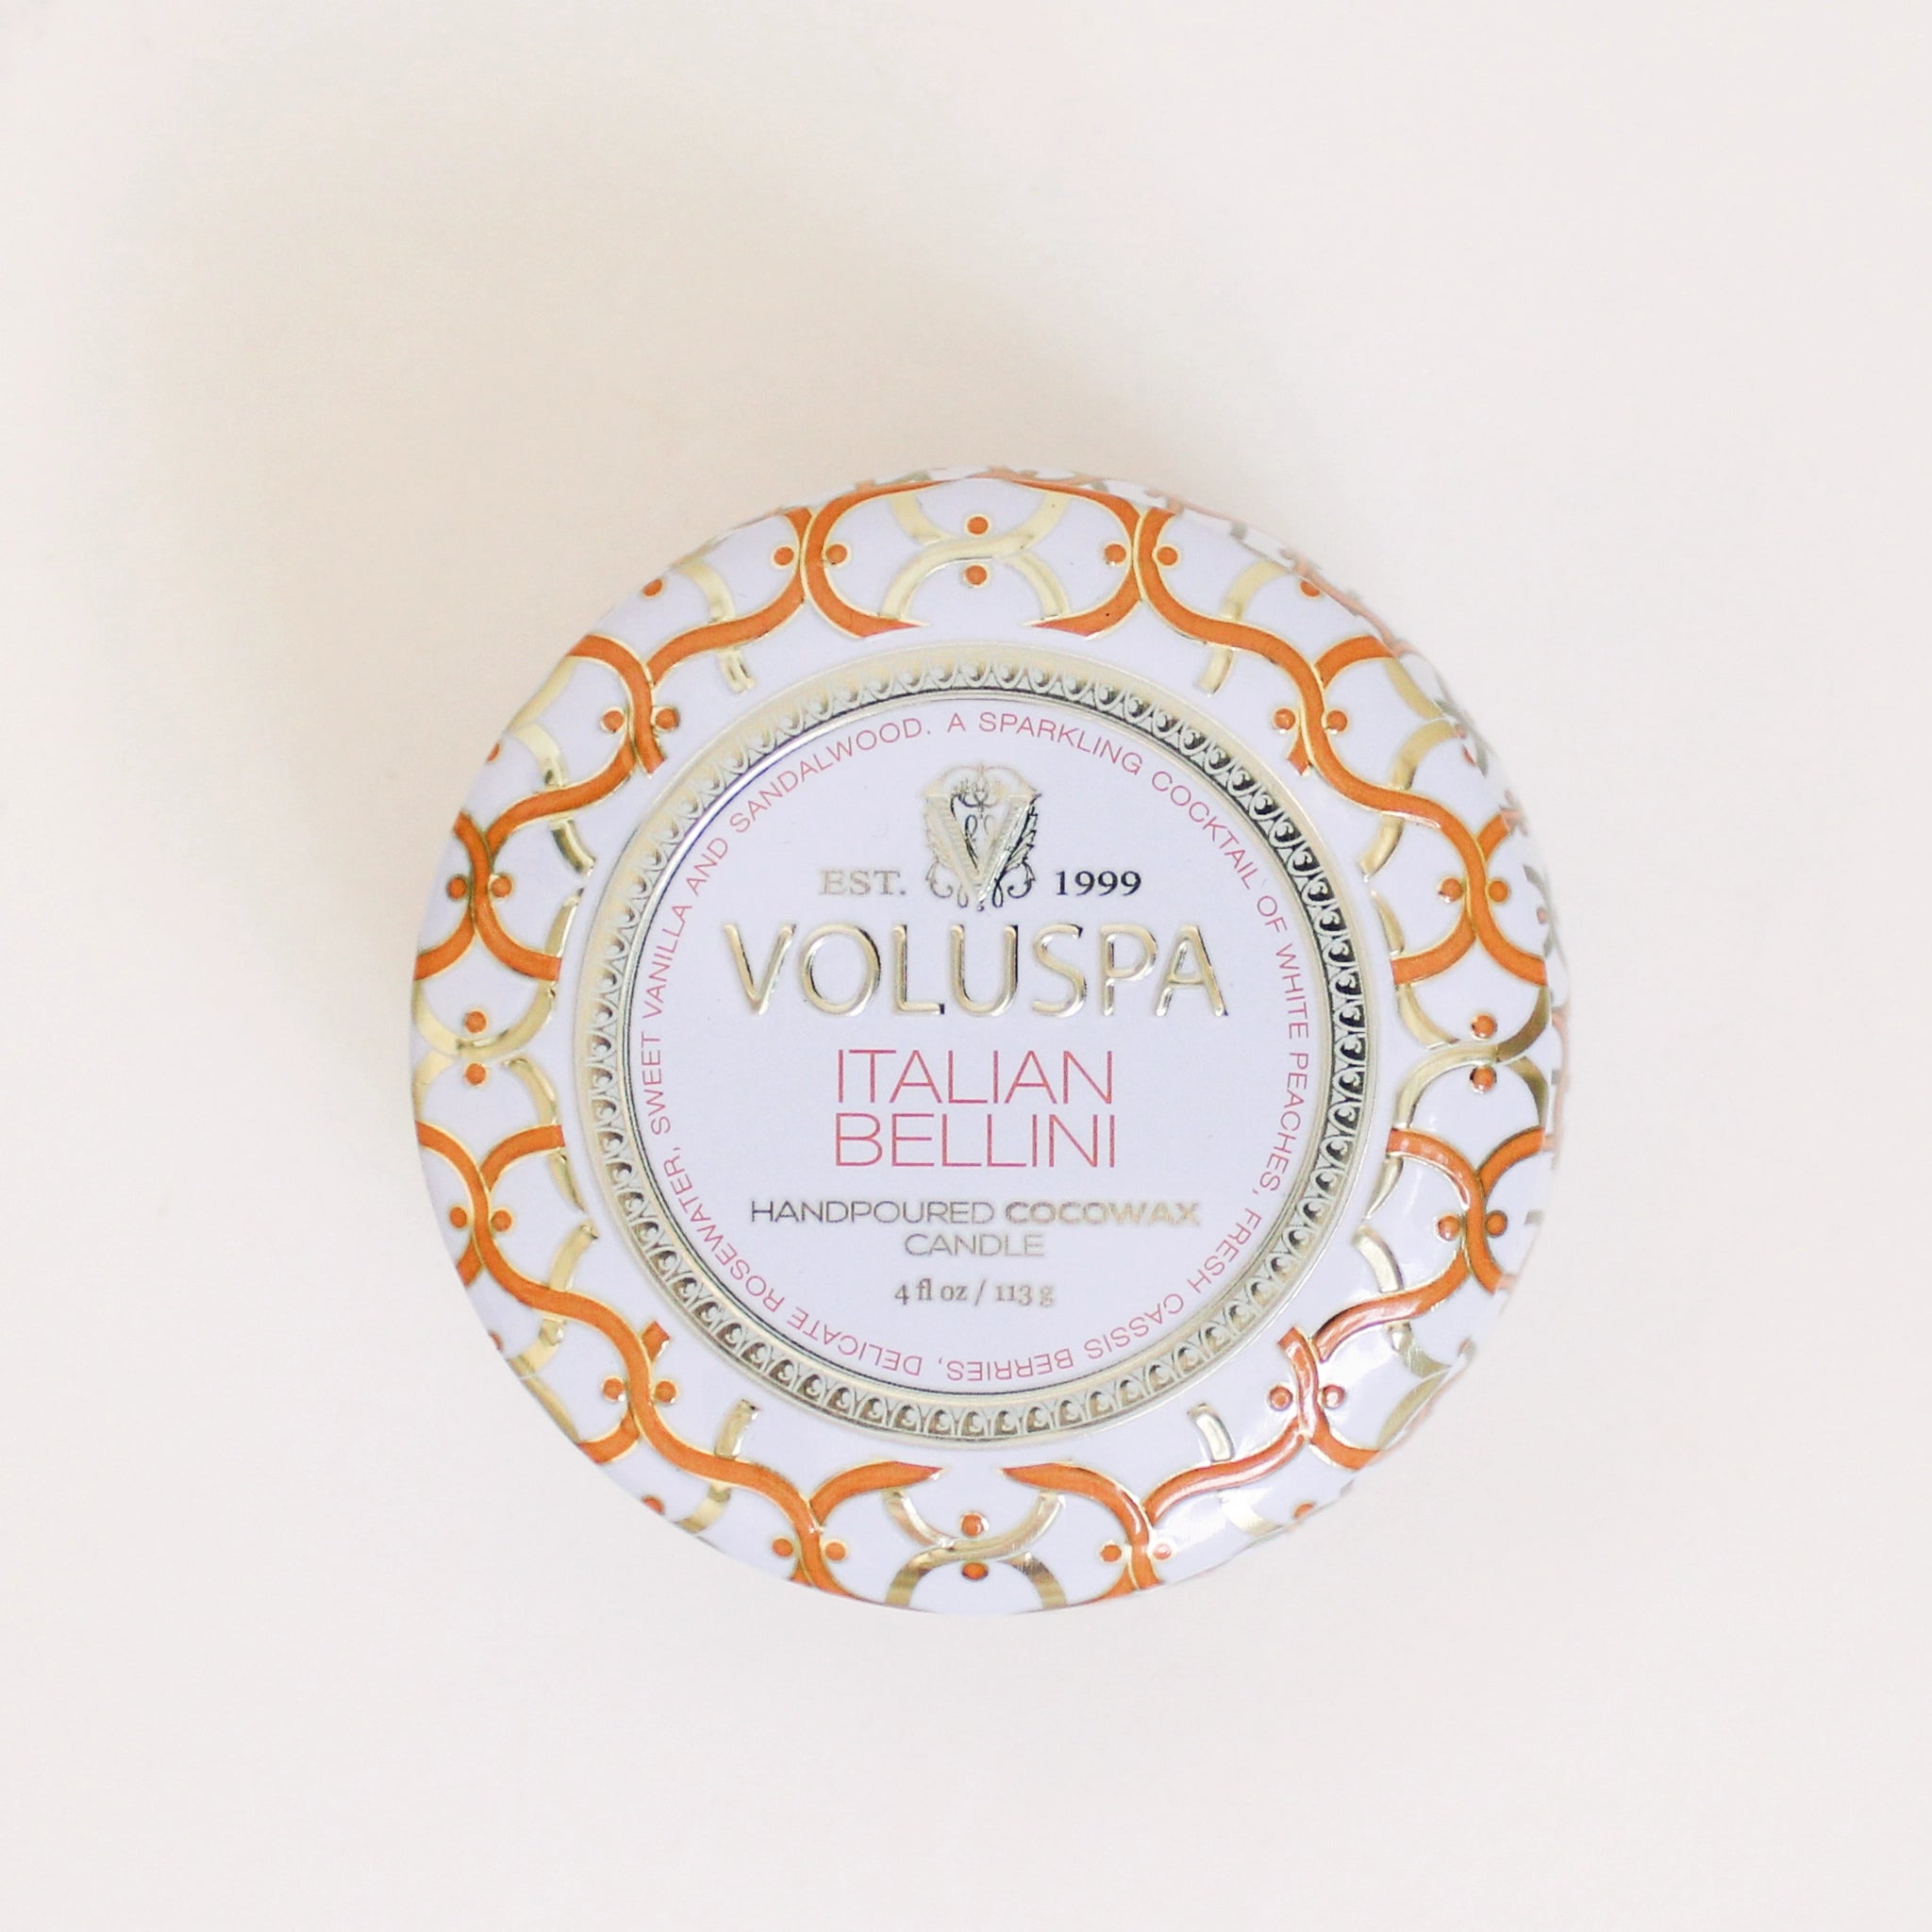 On a cream background is a orange and white tin that contains a candle along with a circle label in the center of the lid that reads, &quot;Voluspa Italian Bellini&quot;.